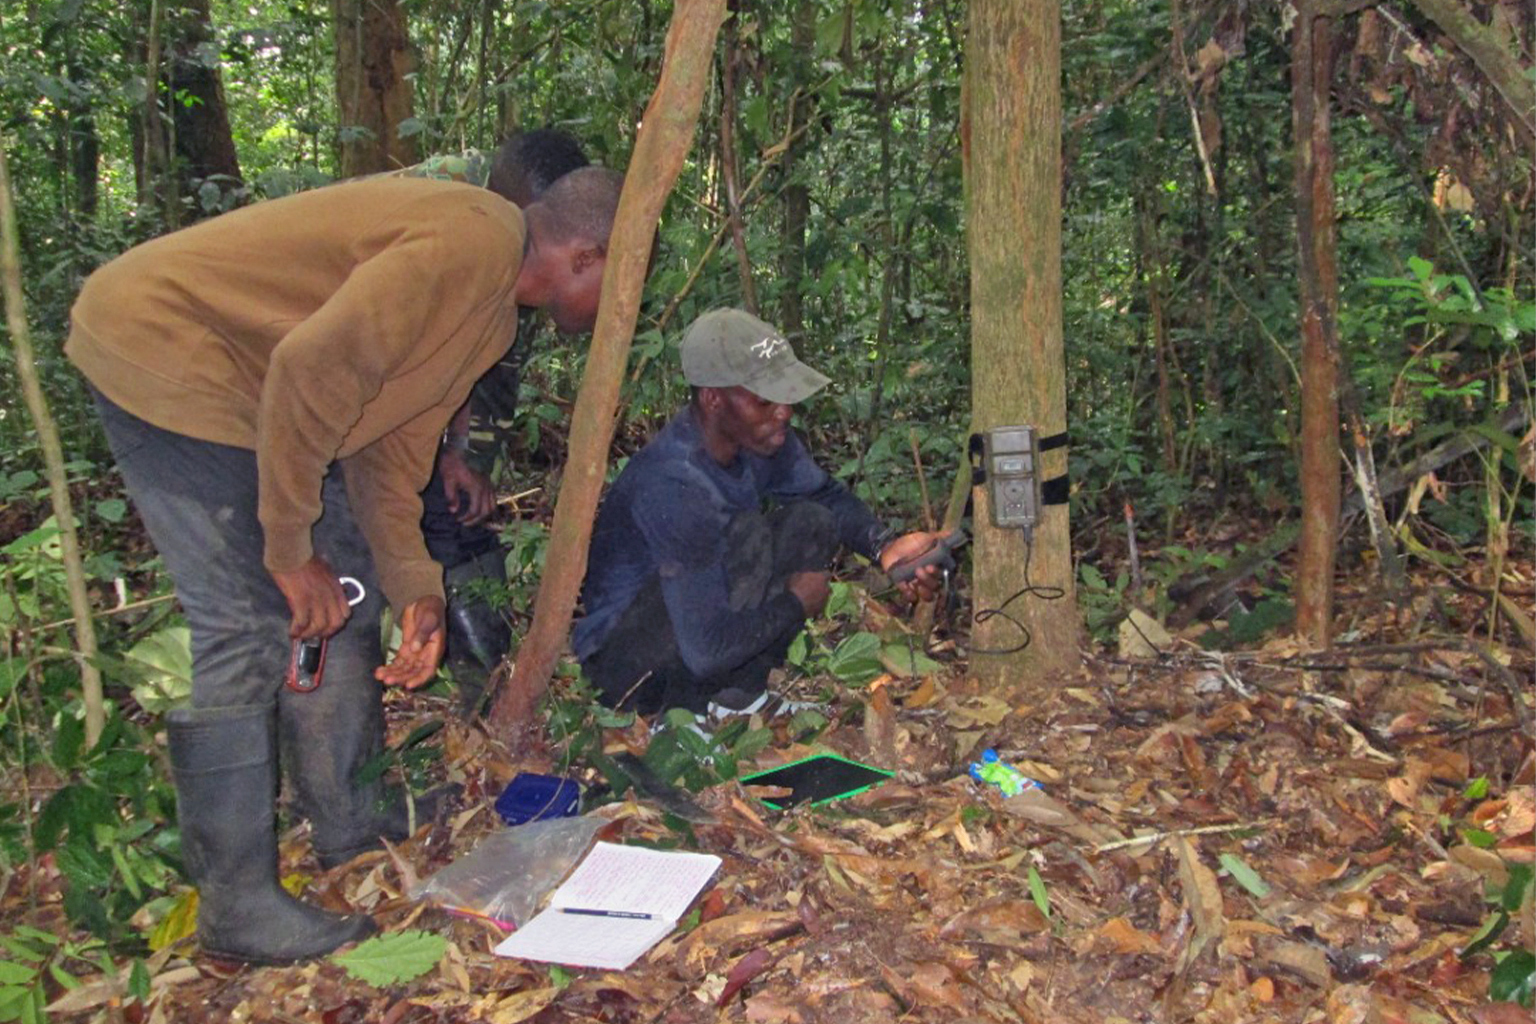 Camera traps being set up in the forests.